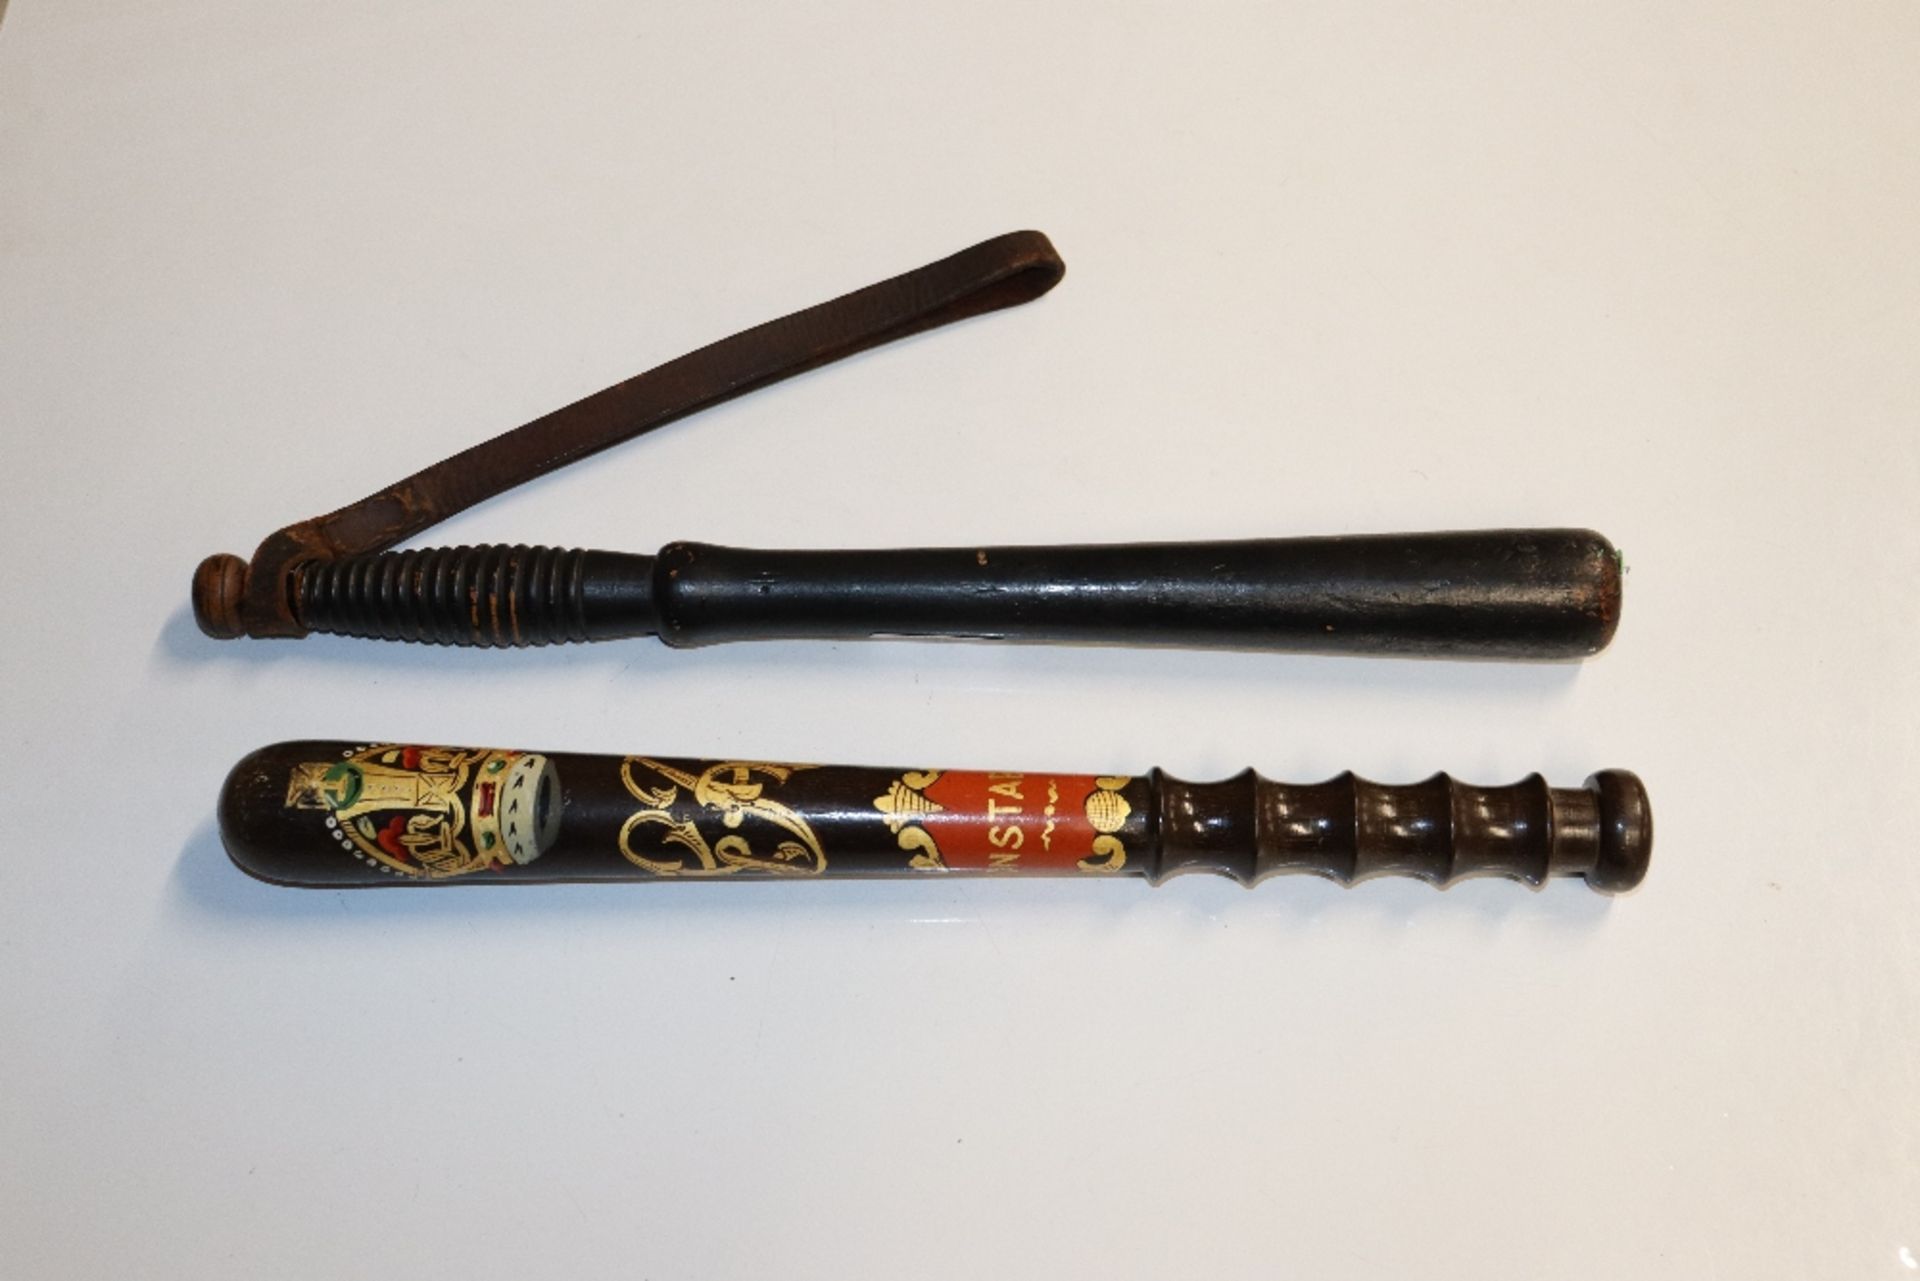 Two wooden truncheons, one with painted decoration